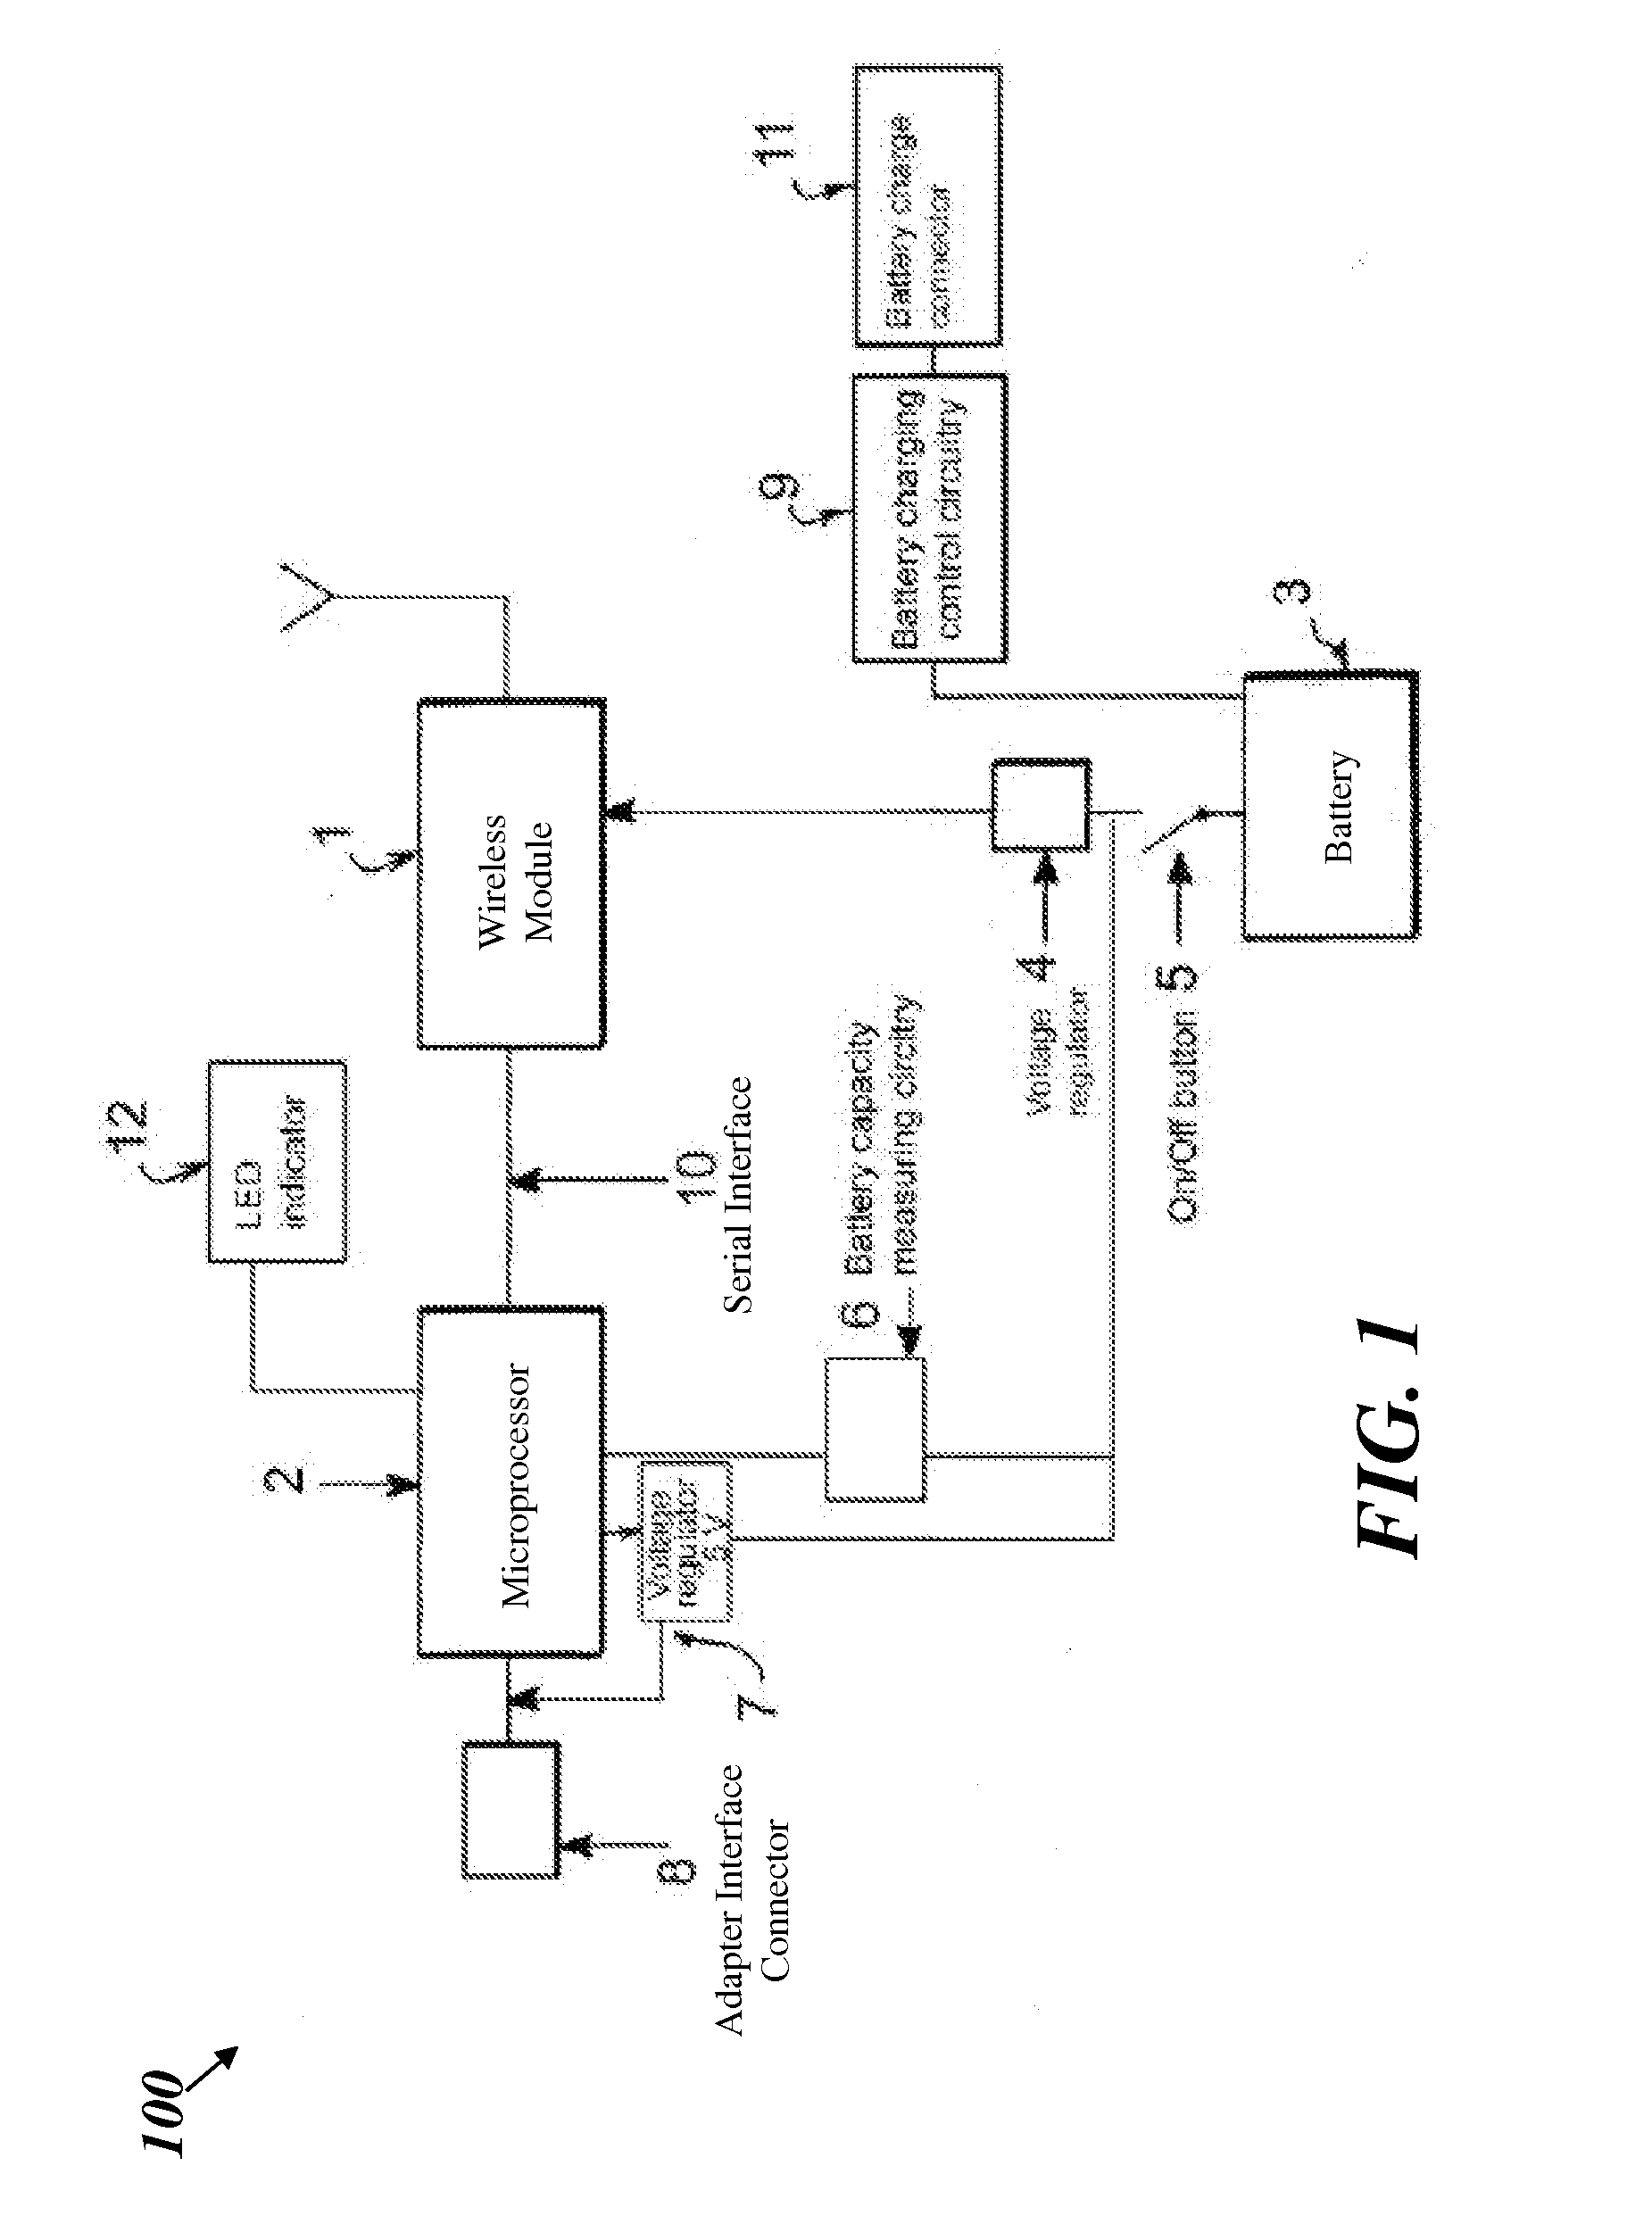 Wireless adapter for connecting a computing device directly to a non-master peripheral device with legacy interface and method of use